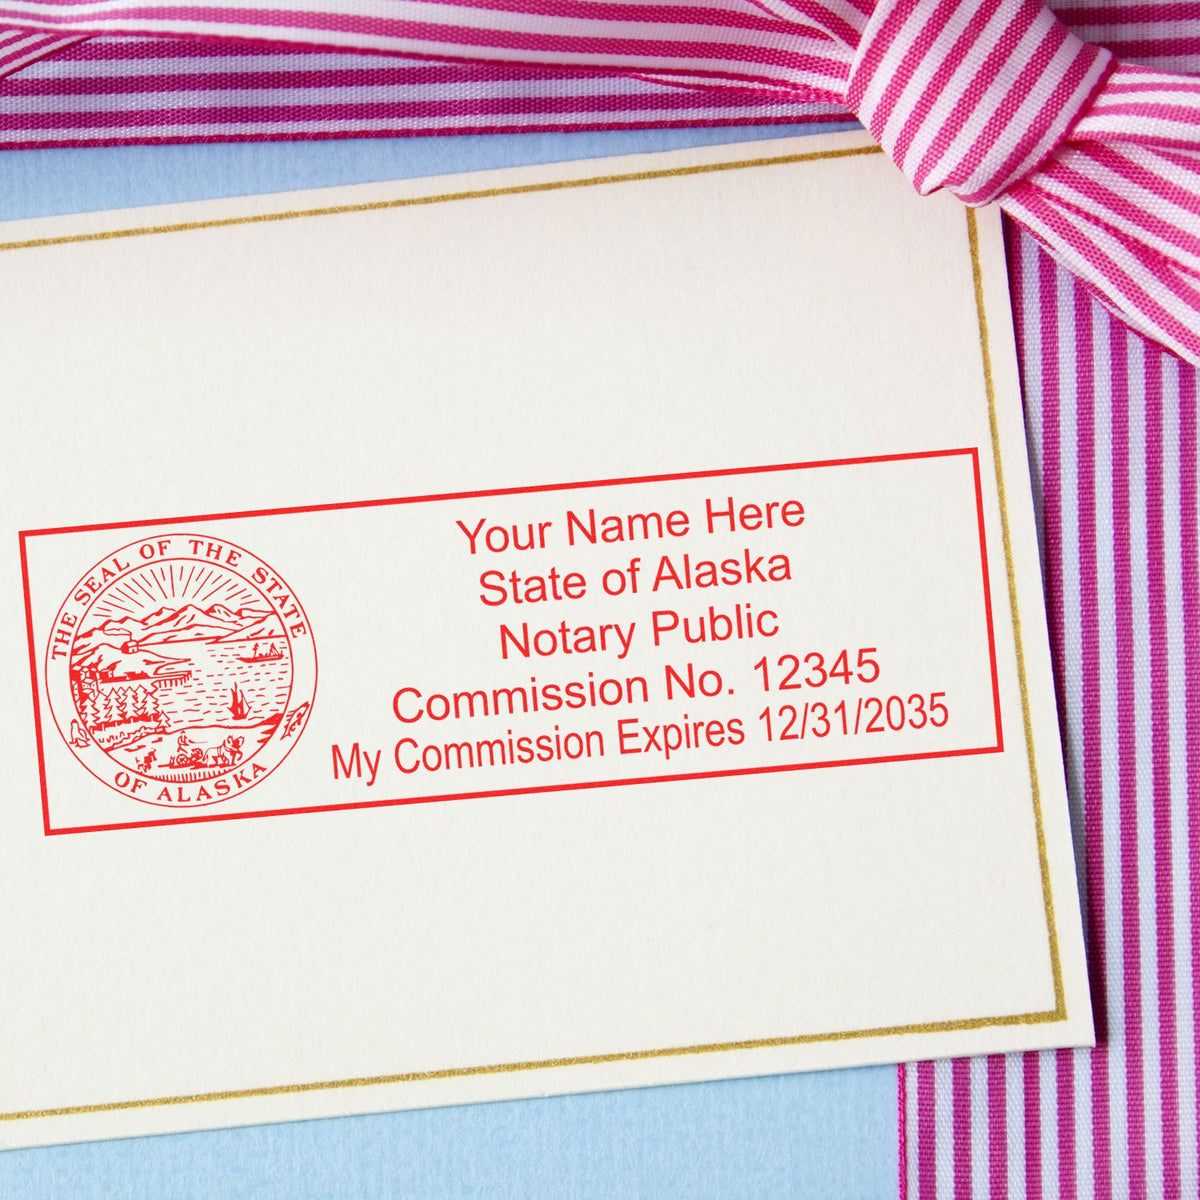 Another Example of a stamped impression of the Super Slim Alaska Notary Public Stamp on a piece of office paper.